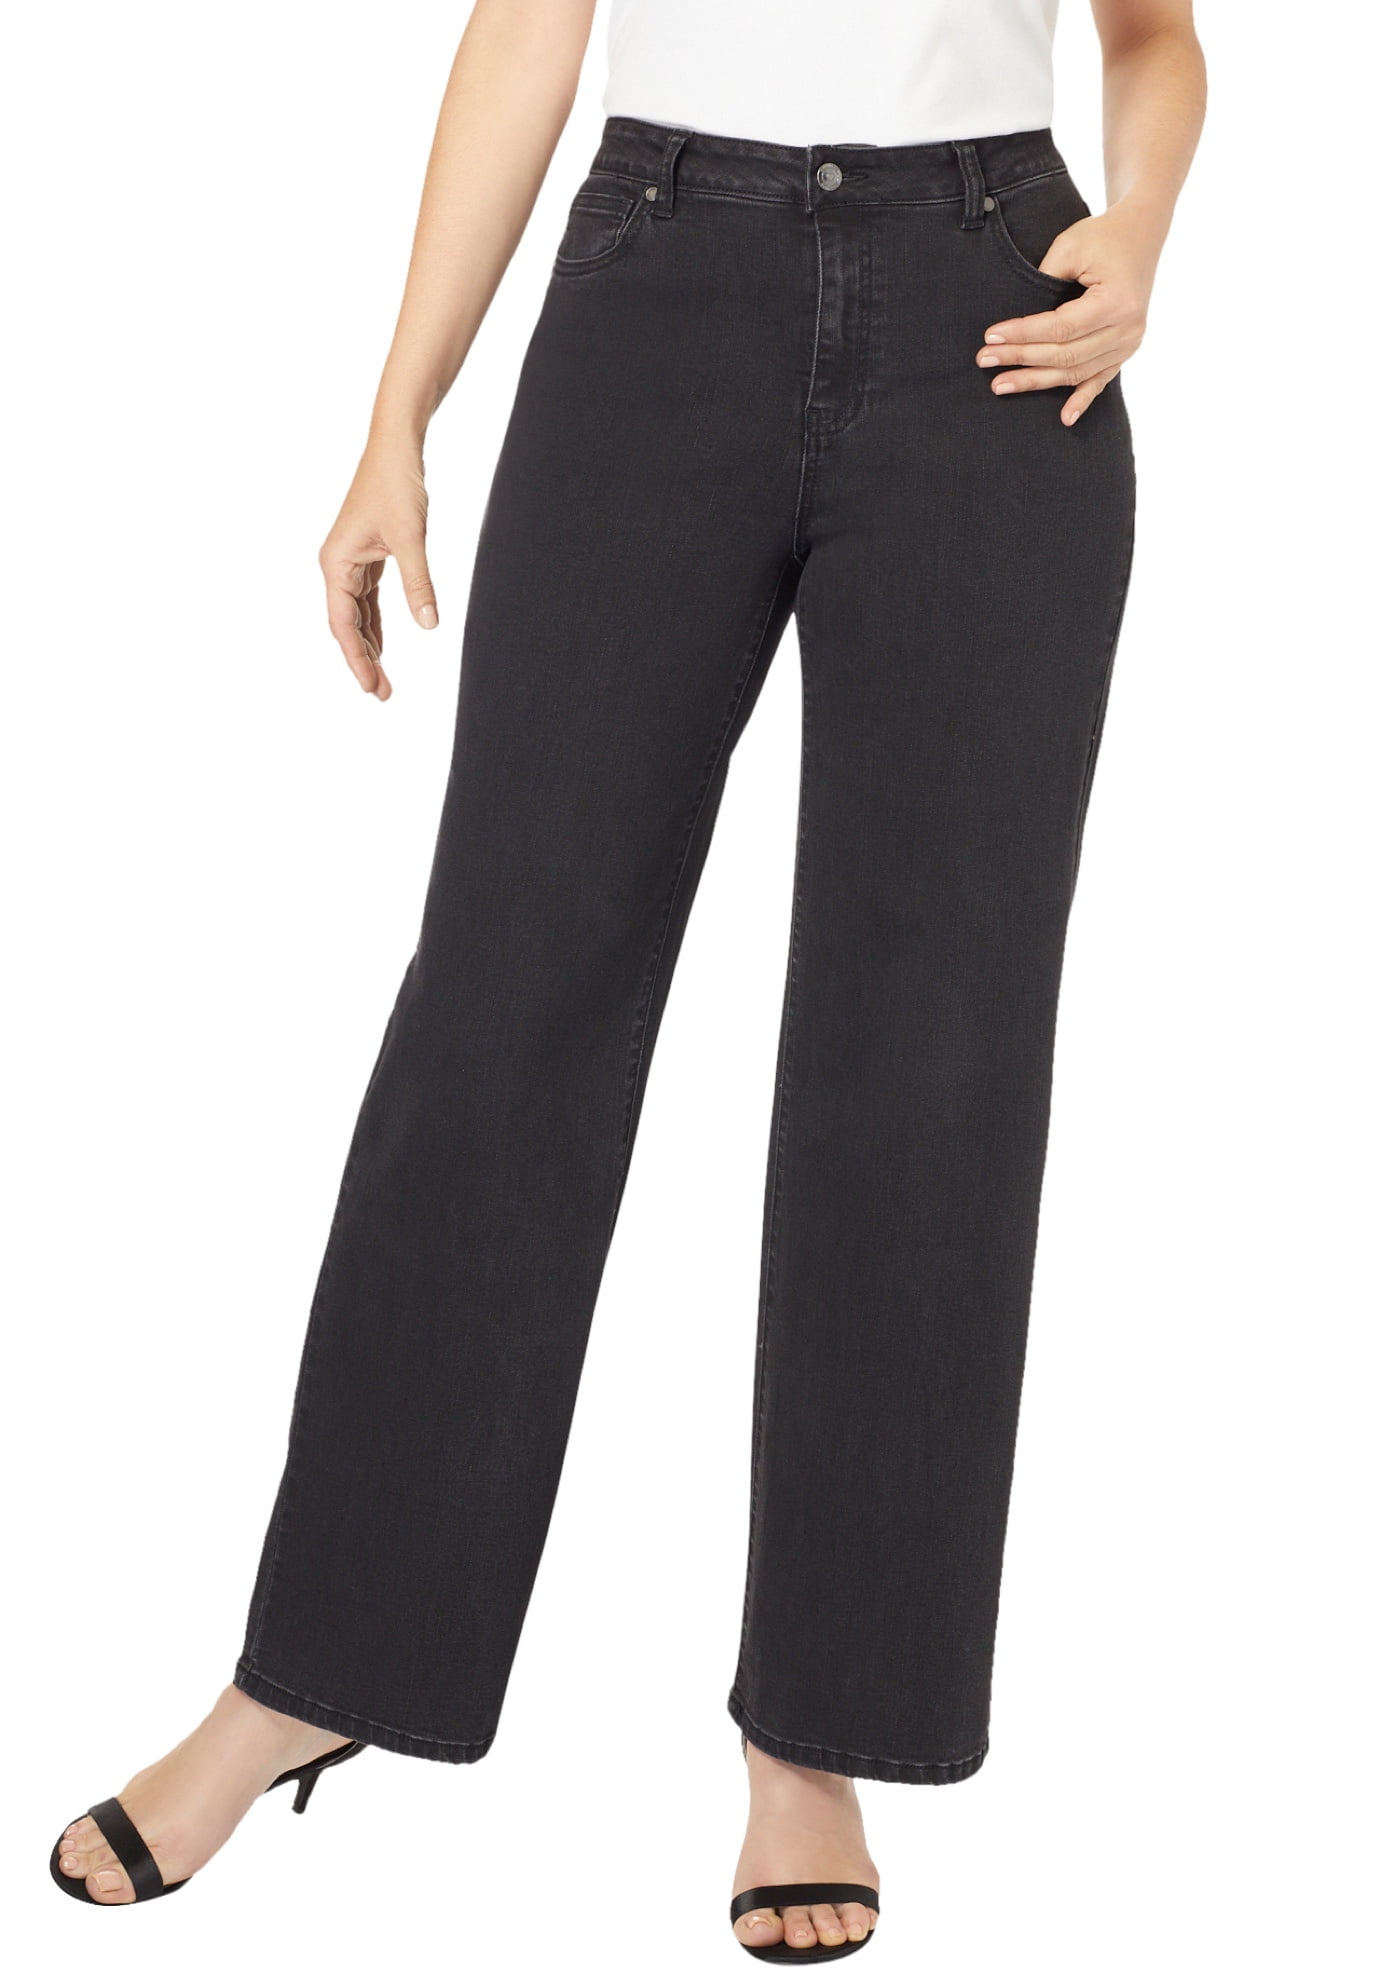 Roamans Women's Plus Size Wide-Leg Jean with Invisible Stretch Soft Comfortable 